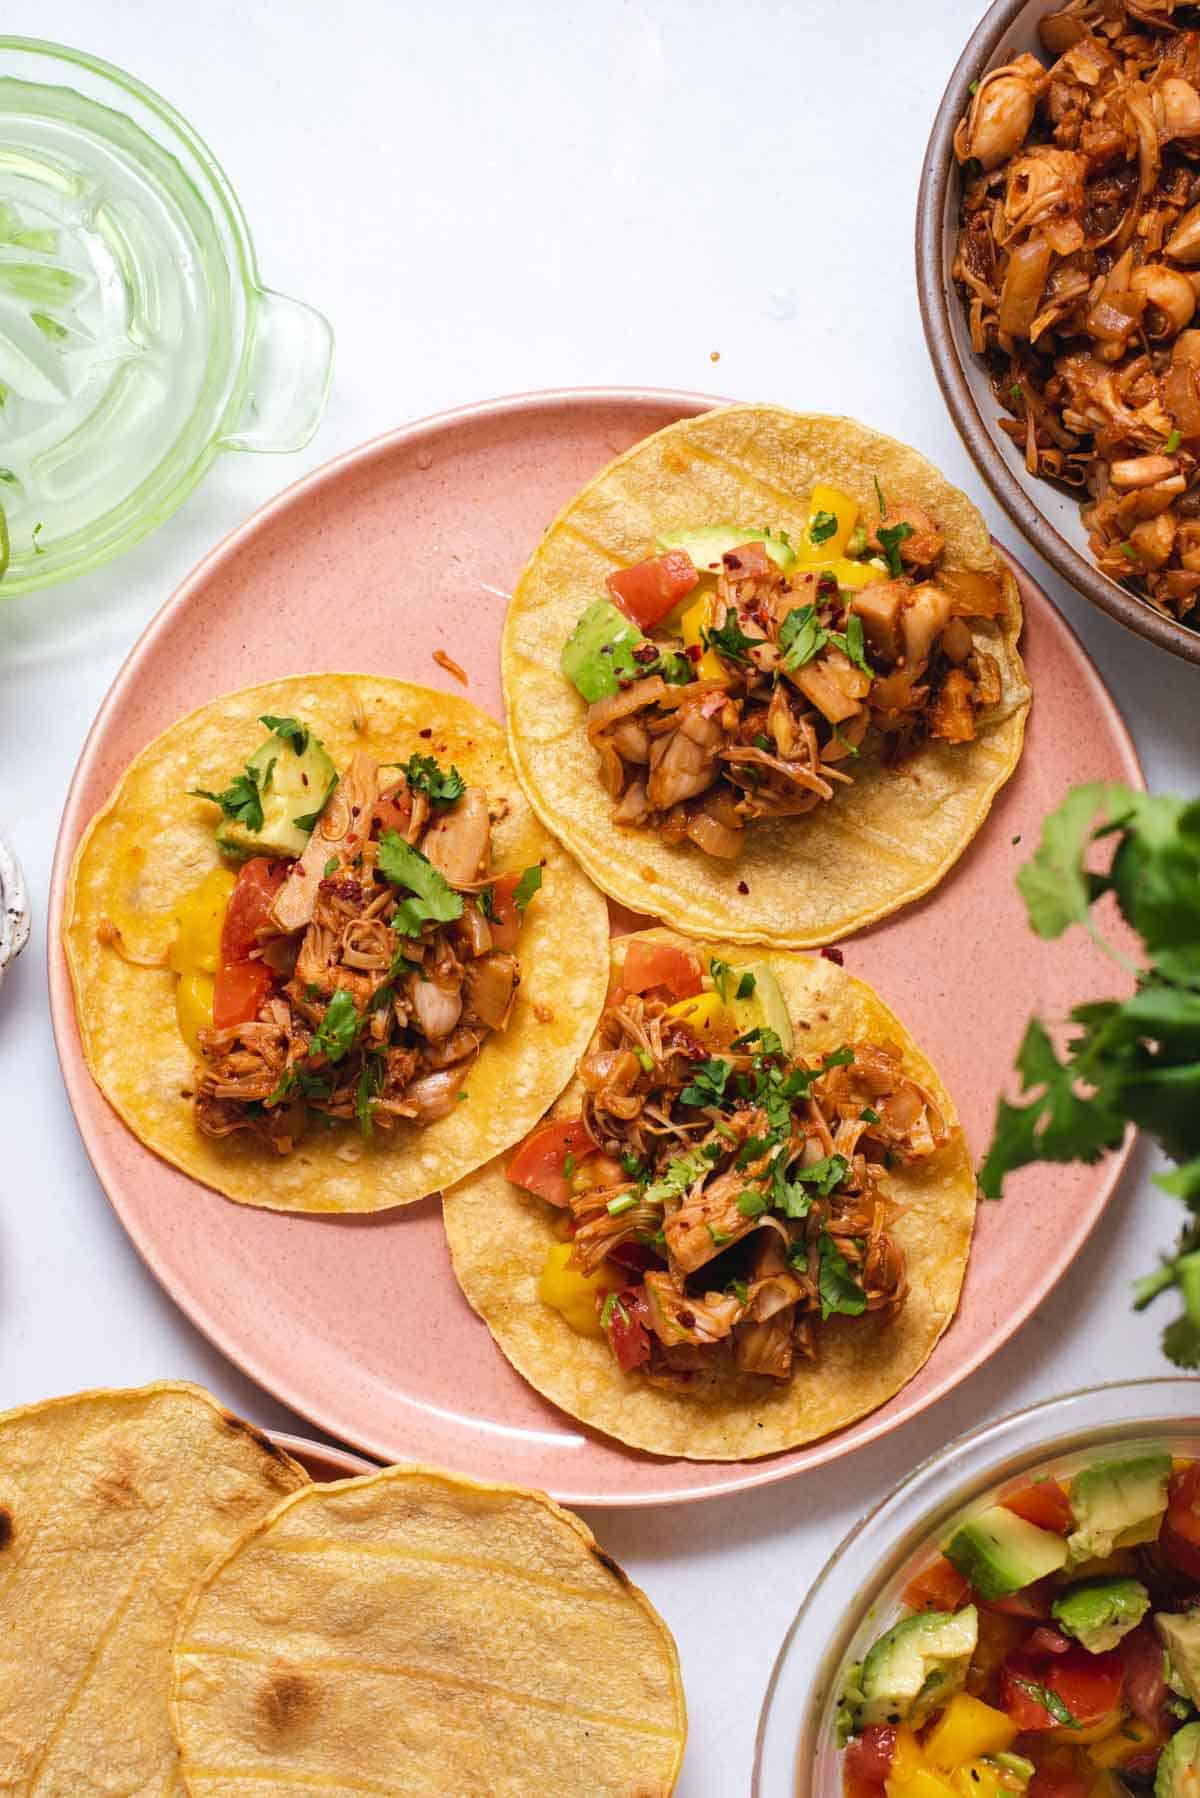 A photo of three small bbq jackfruit tacos on a pink plate.